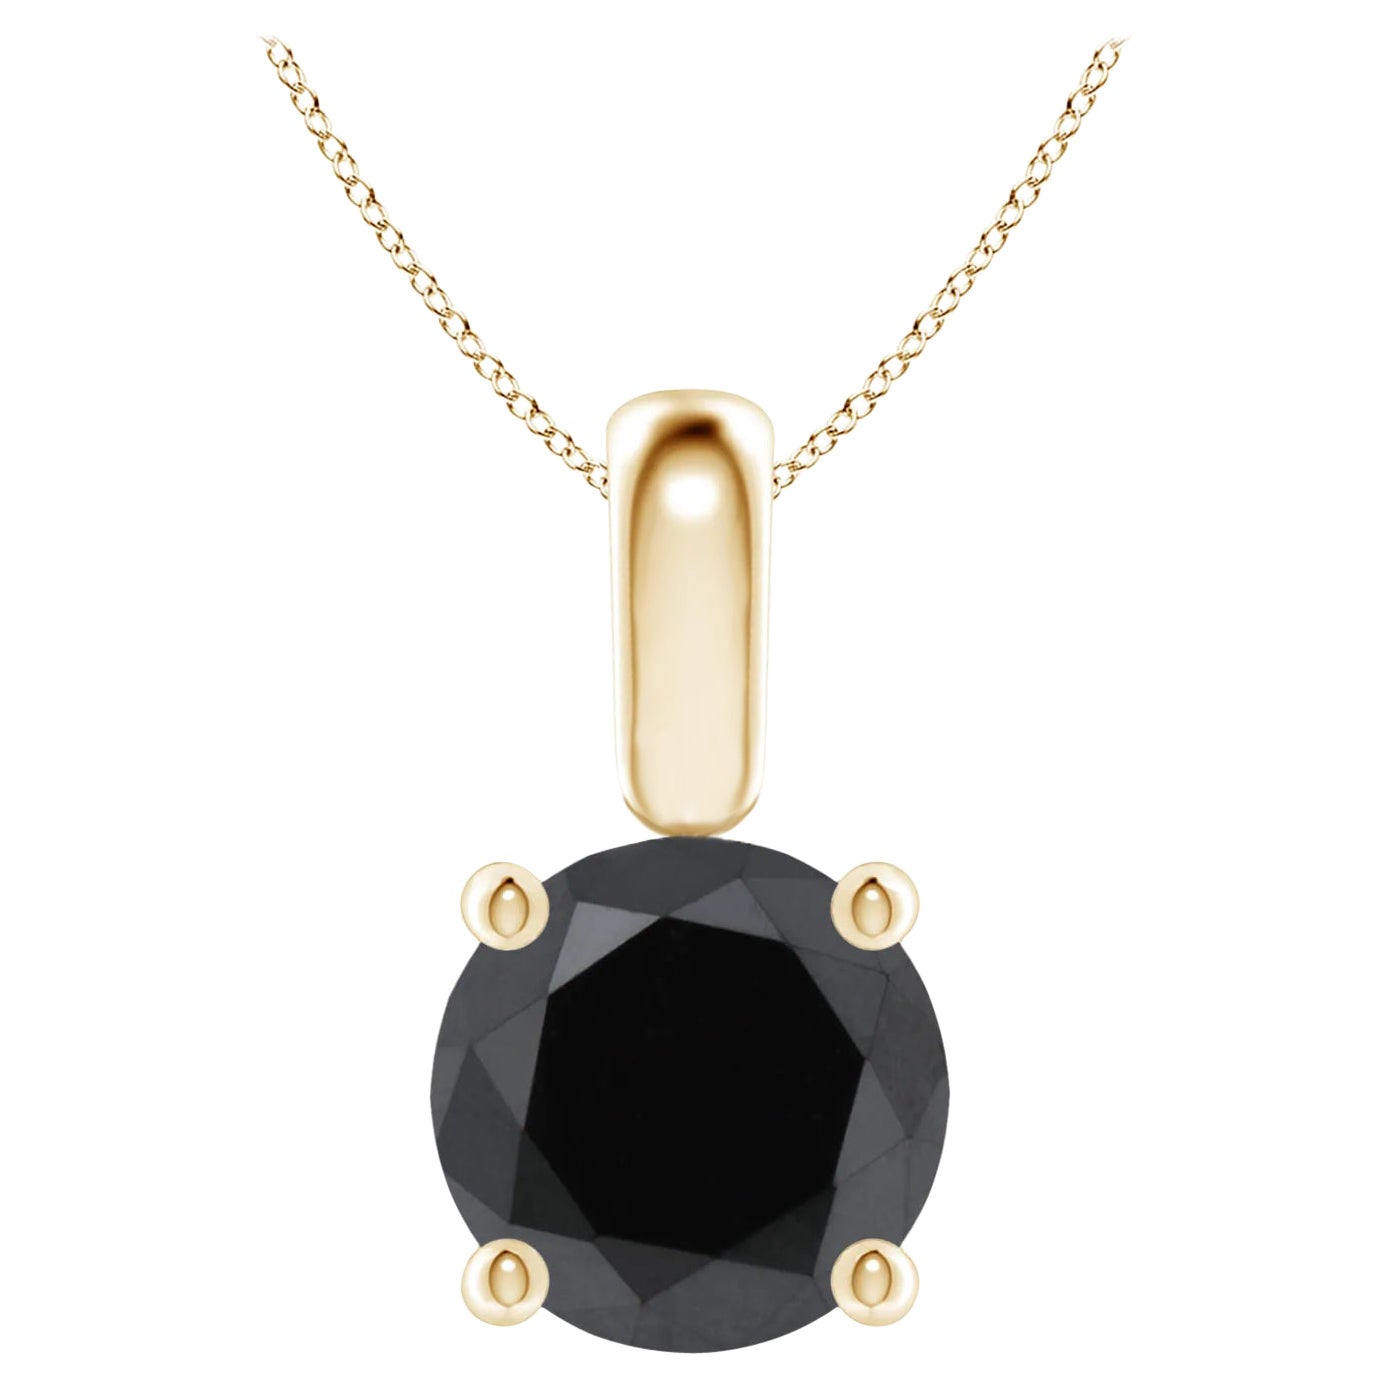 1.56 Carat Round Black Diamond Solitaire Pendant Necklace in 14K Yellow Gold